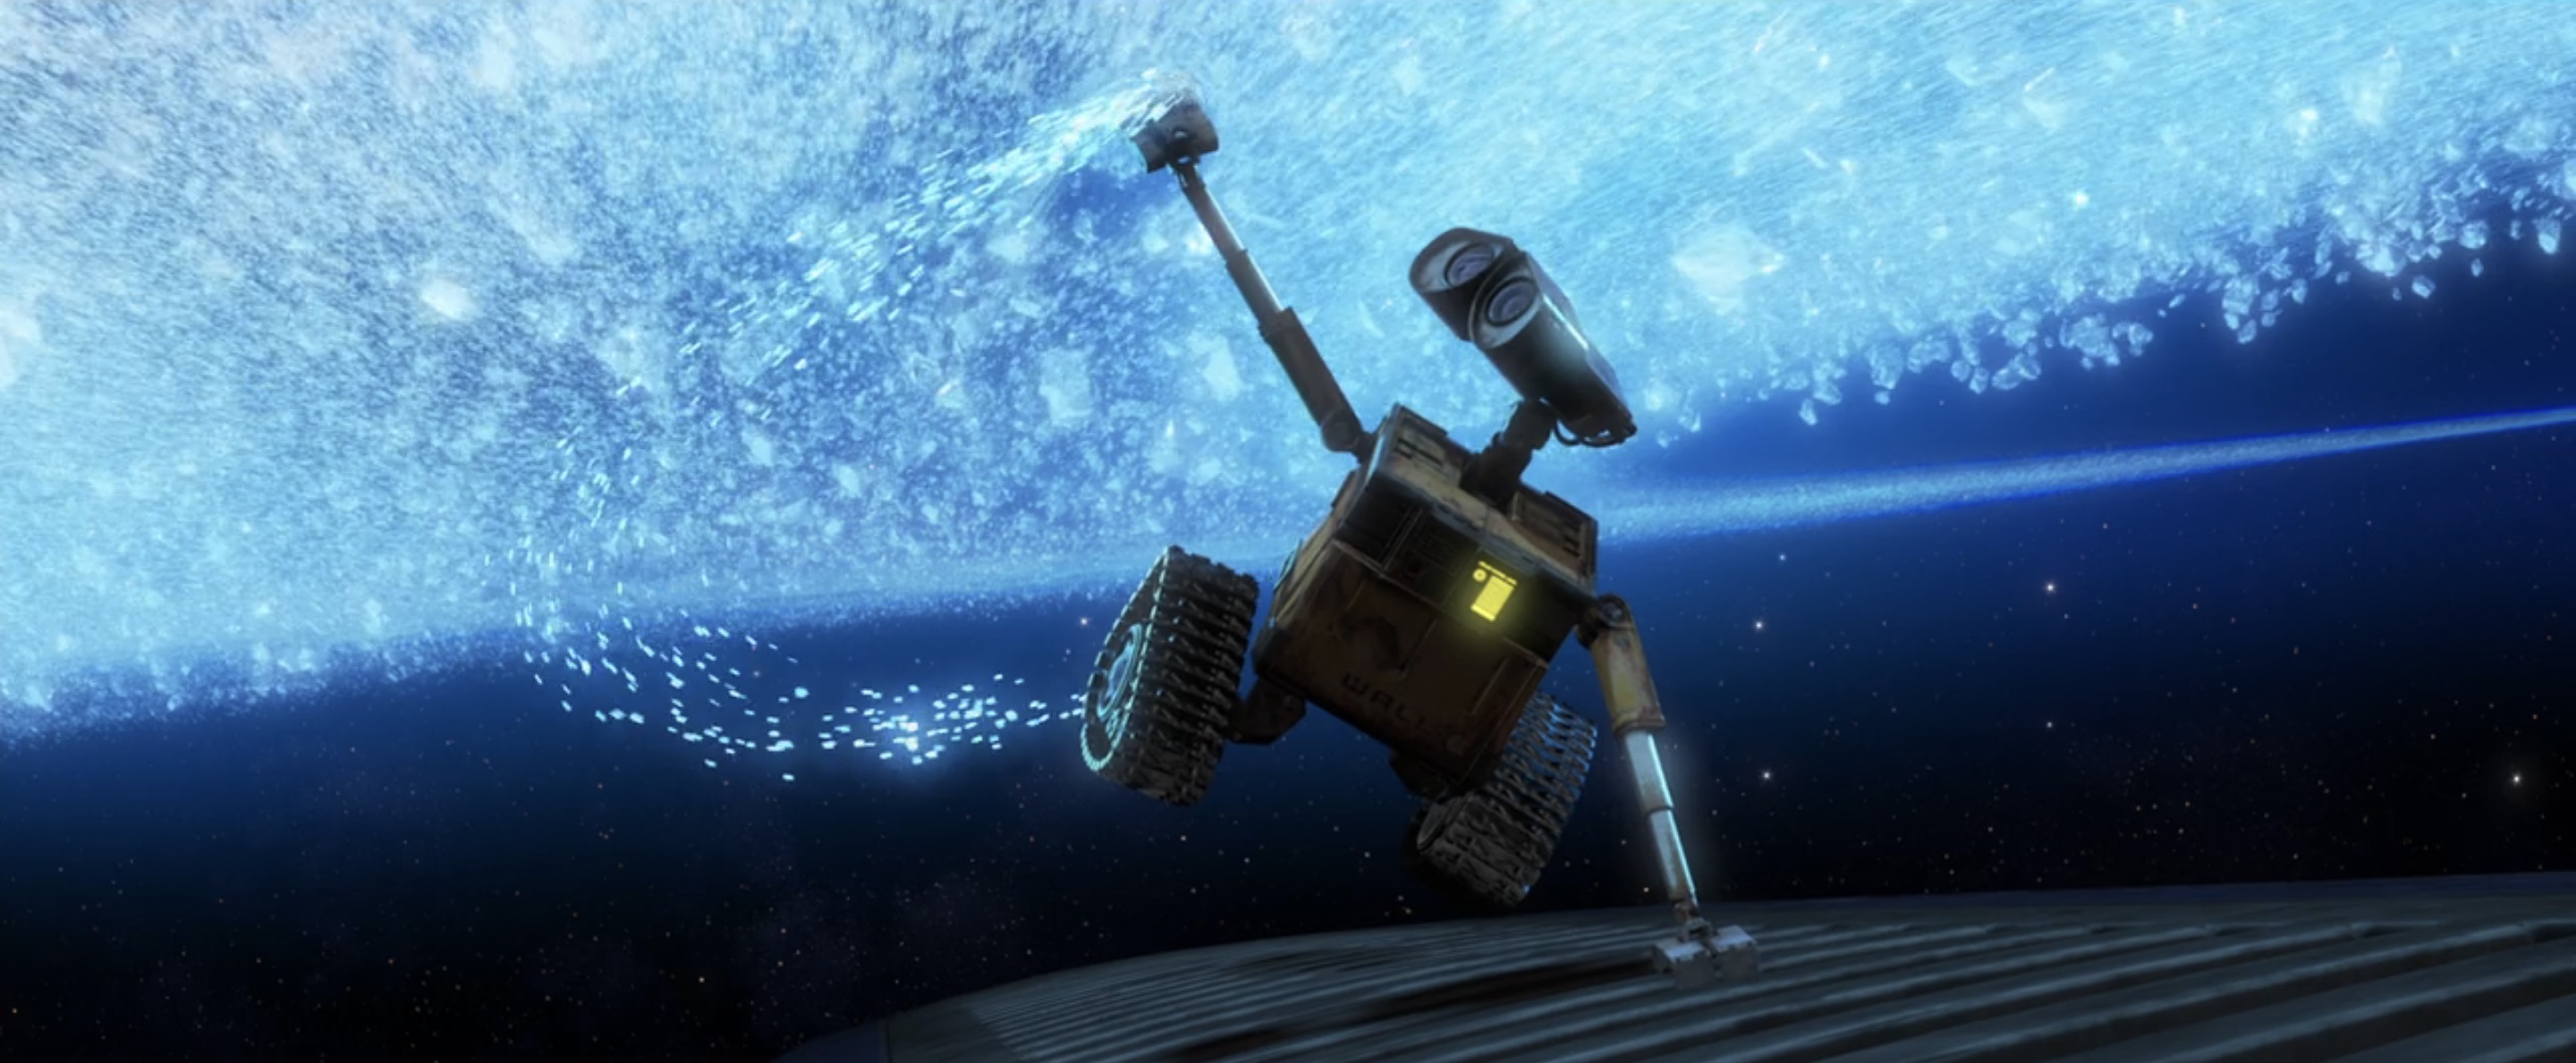 WALL-E reaching out to a ring system in "WALL-E."